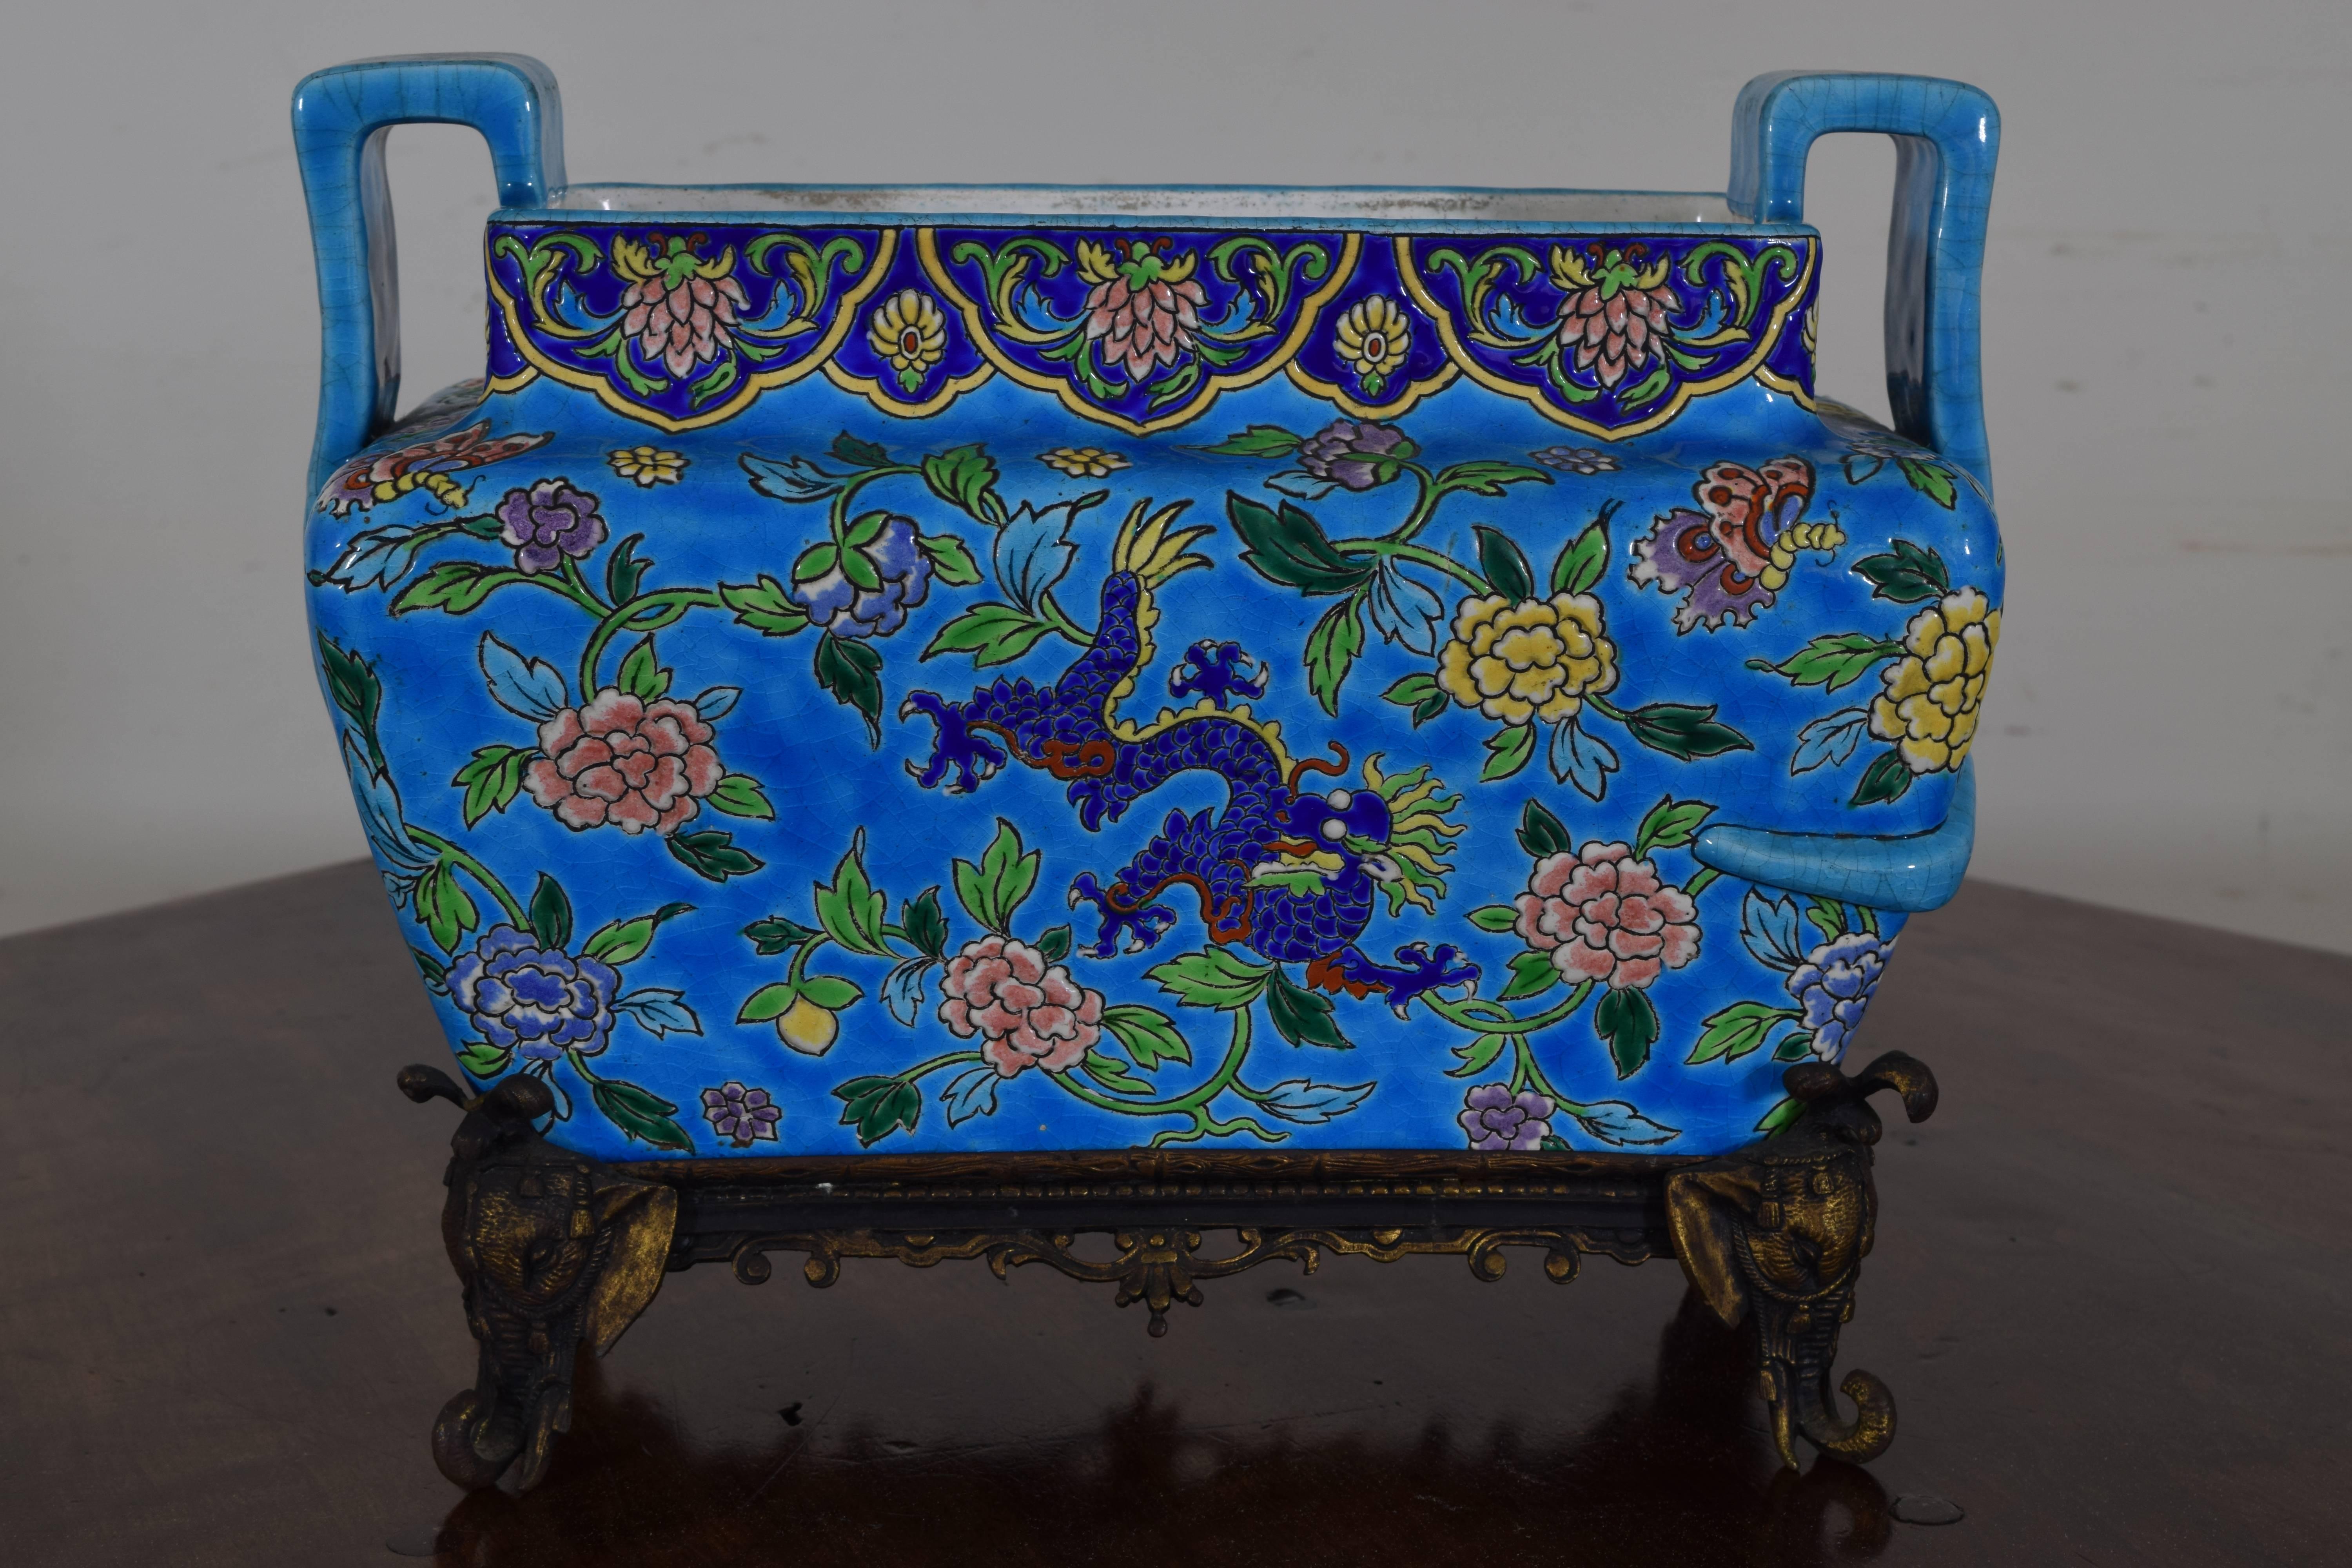 Of continental origin and having a makers mark on underside, glazed cachepot in brilliant colors of blue with dragons and various colored flowers, the gilt metal stands with elephants heads.